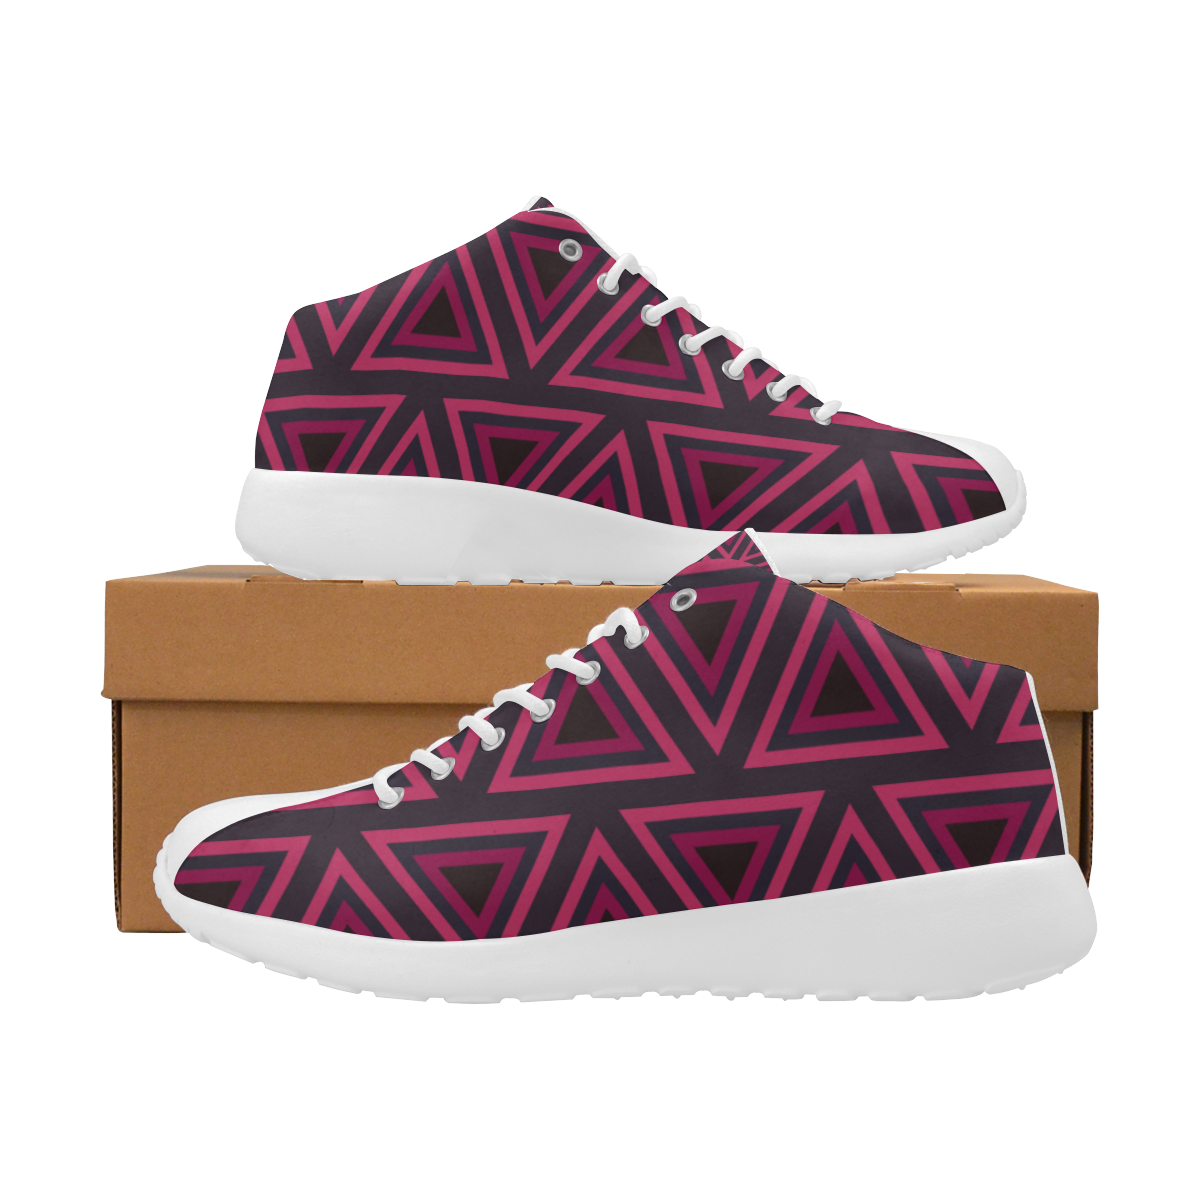 Tribal Ethnic Triangles Women's Basketball Training Shoes/Large Size (Model 47502)